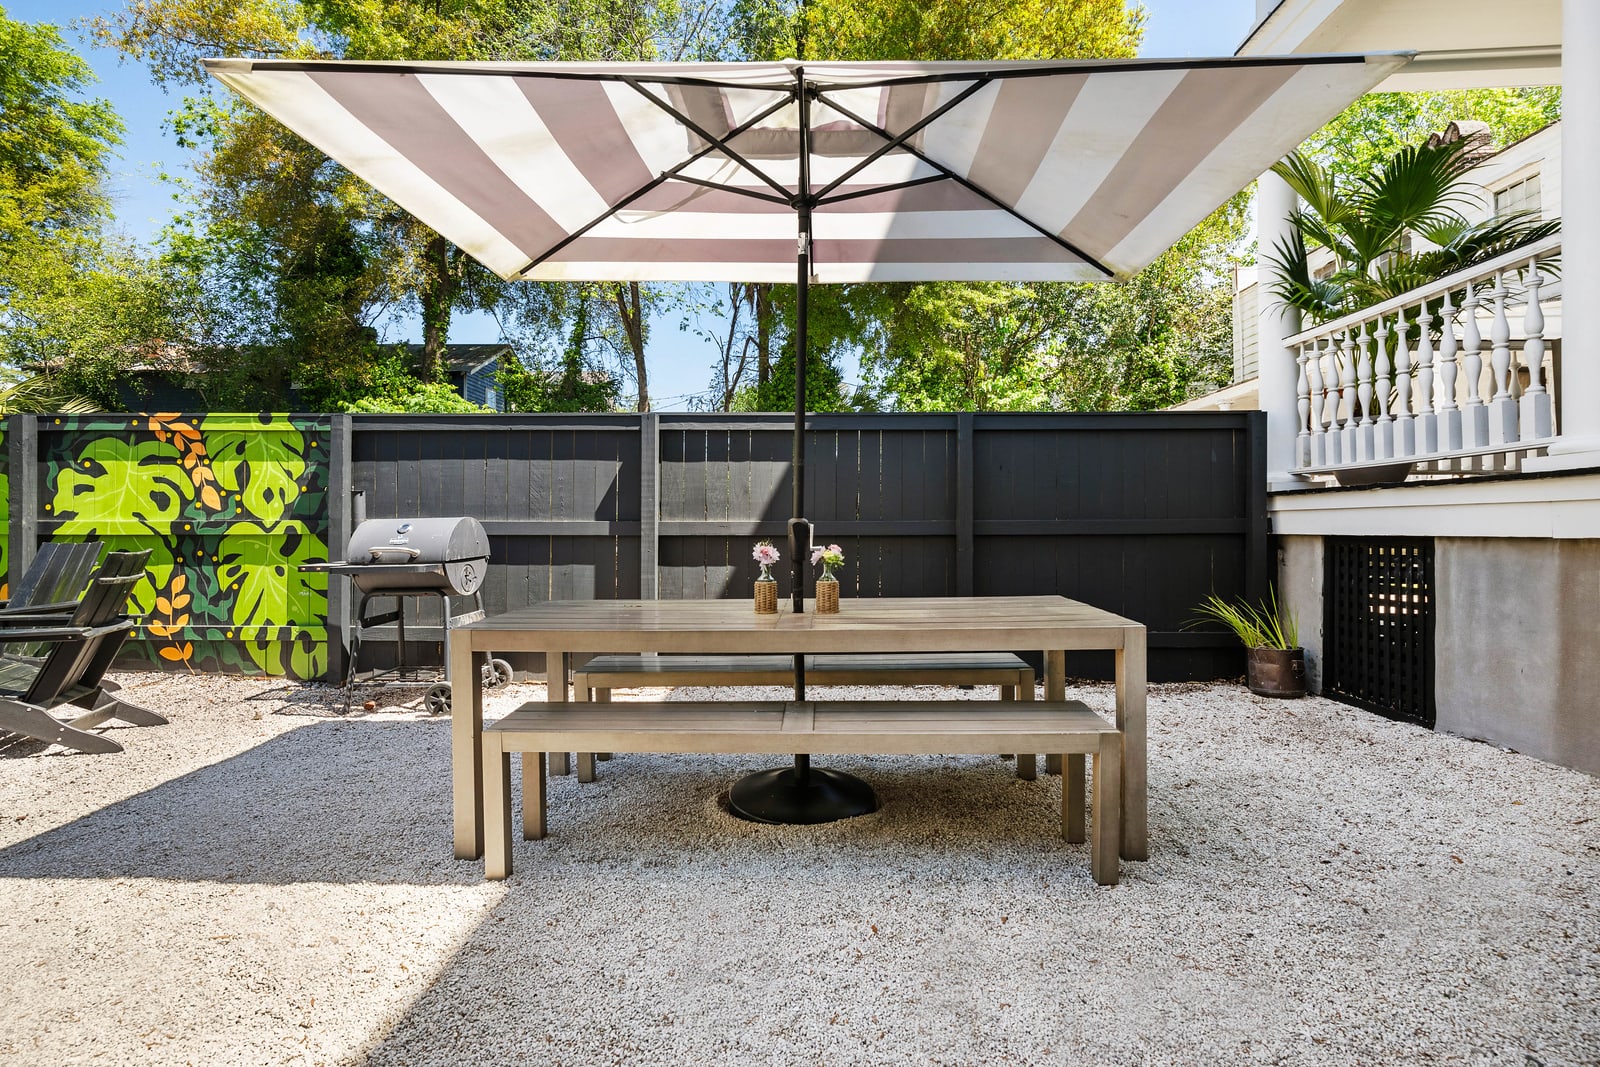 Outdoor dining space for your group